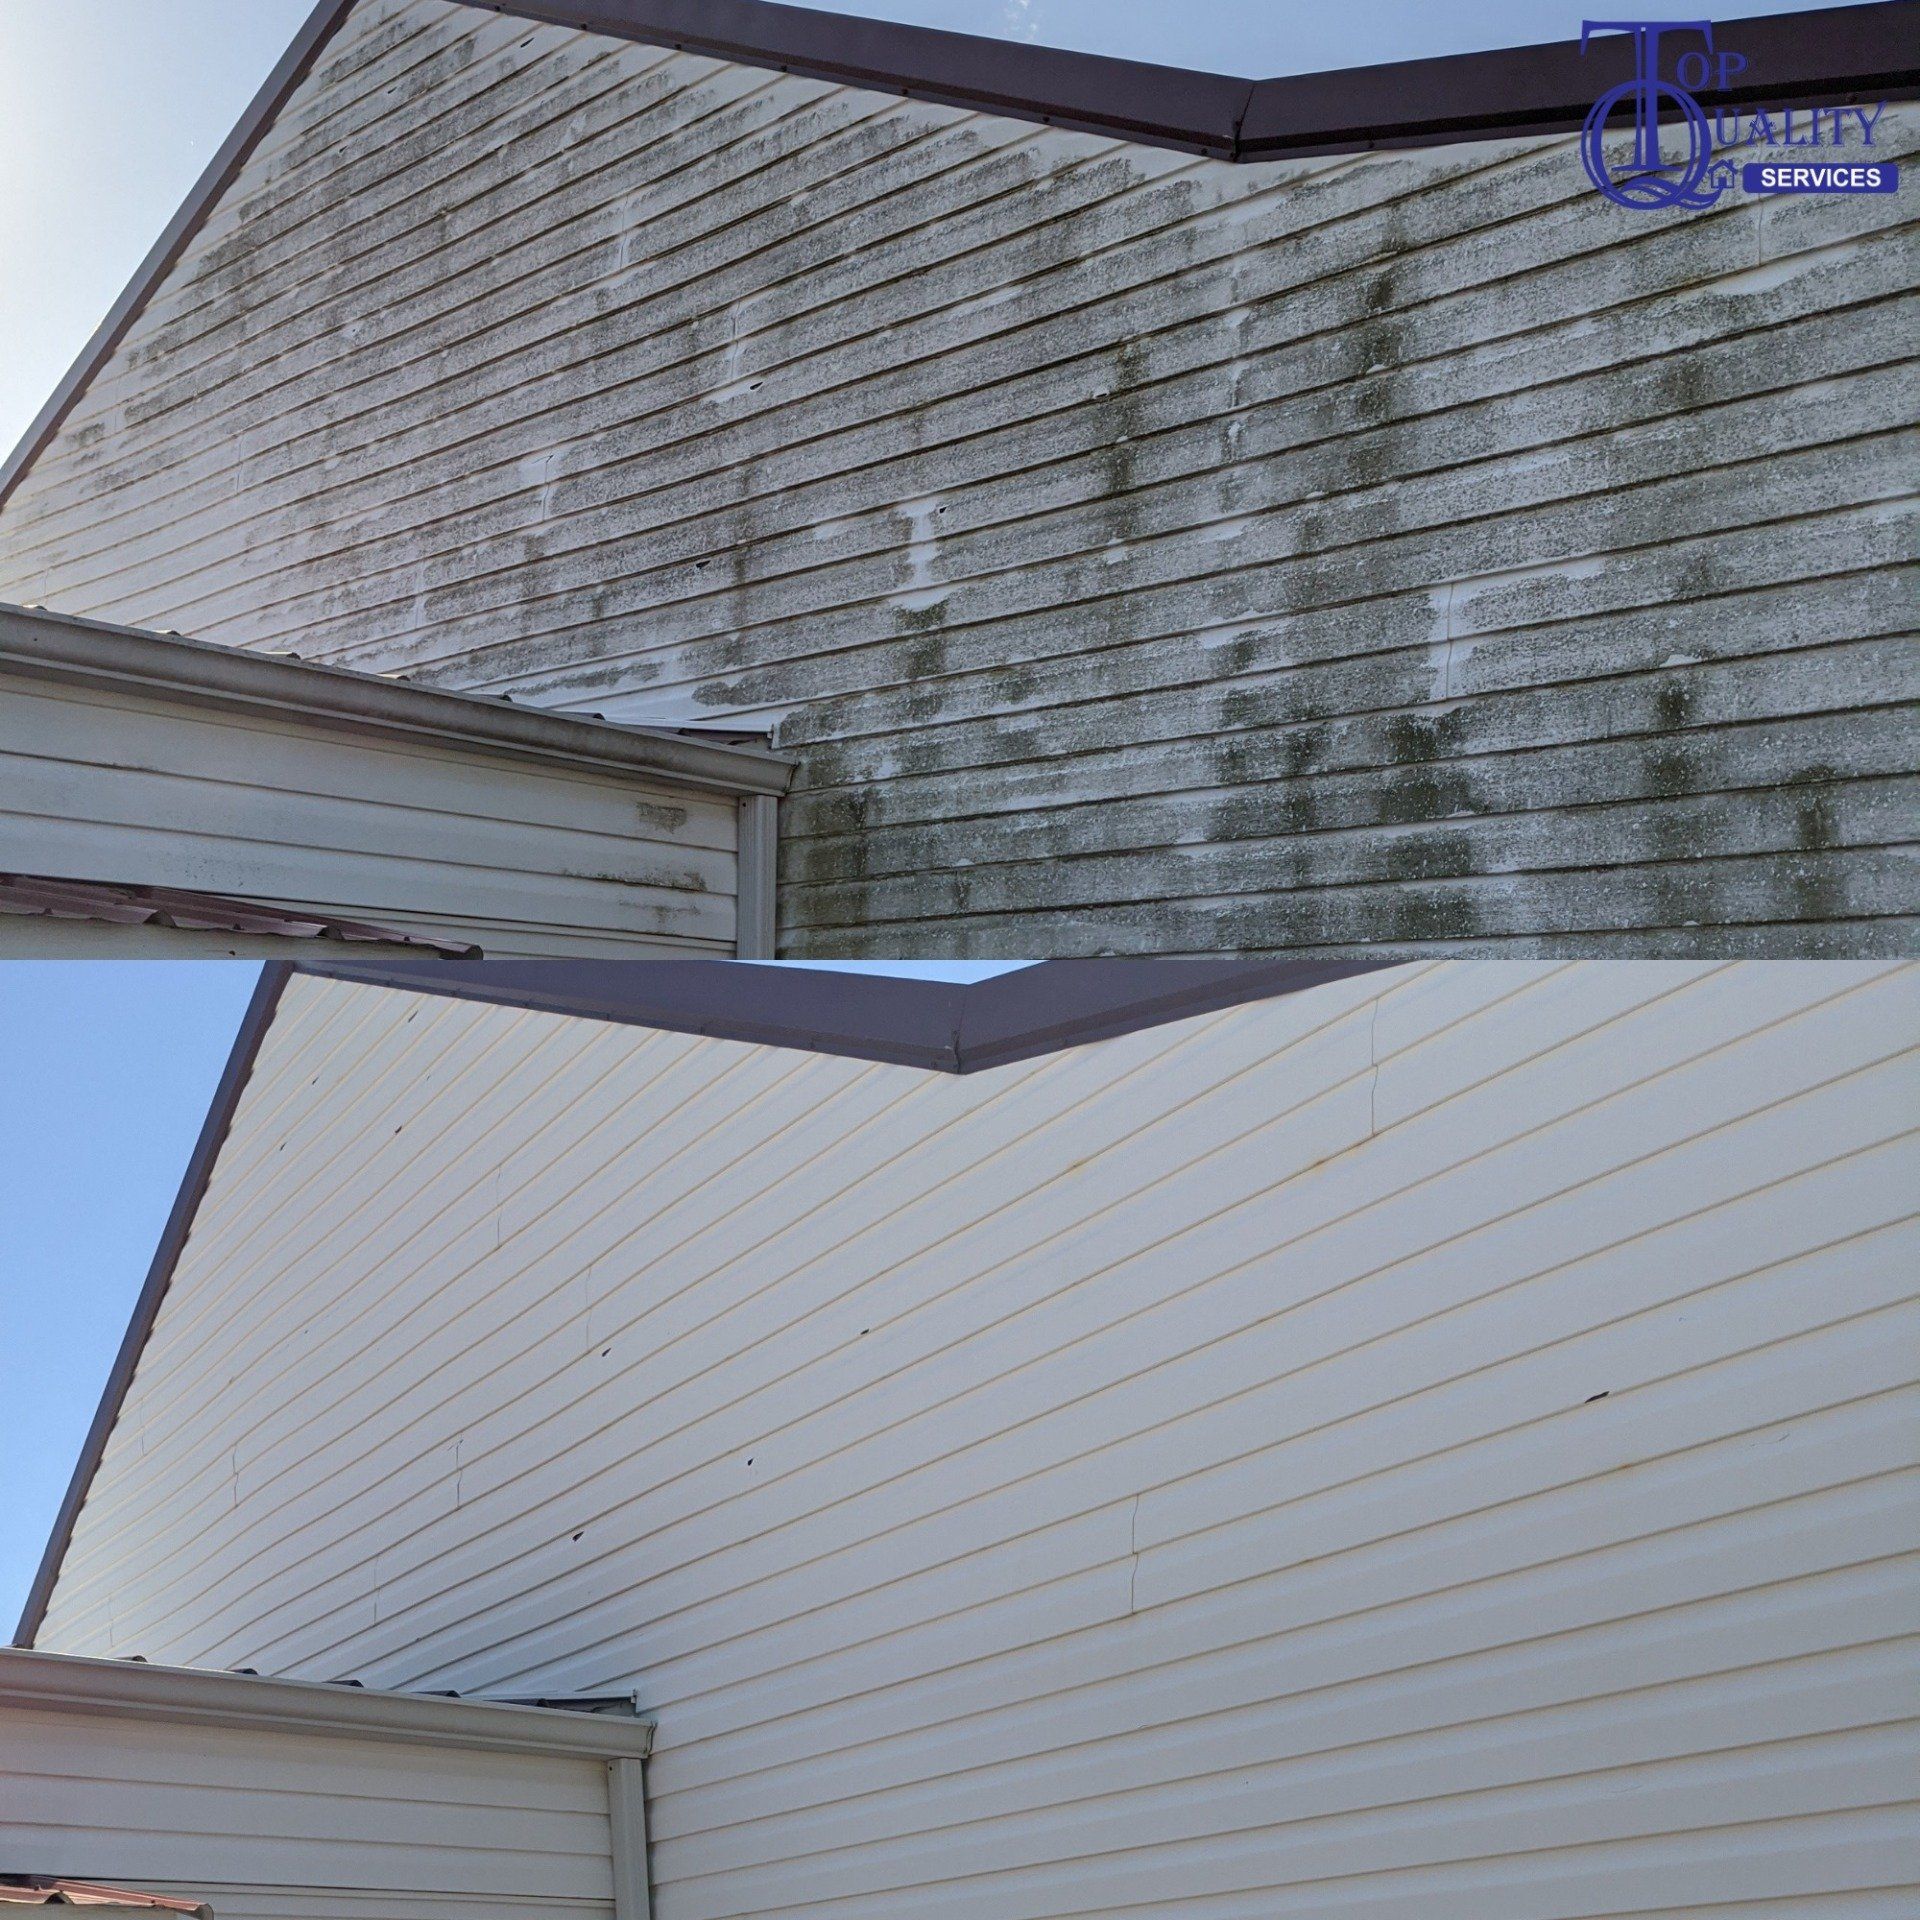 A before and after picture of a house 's siding